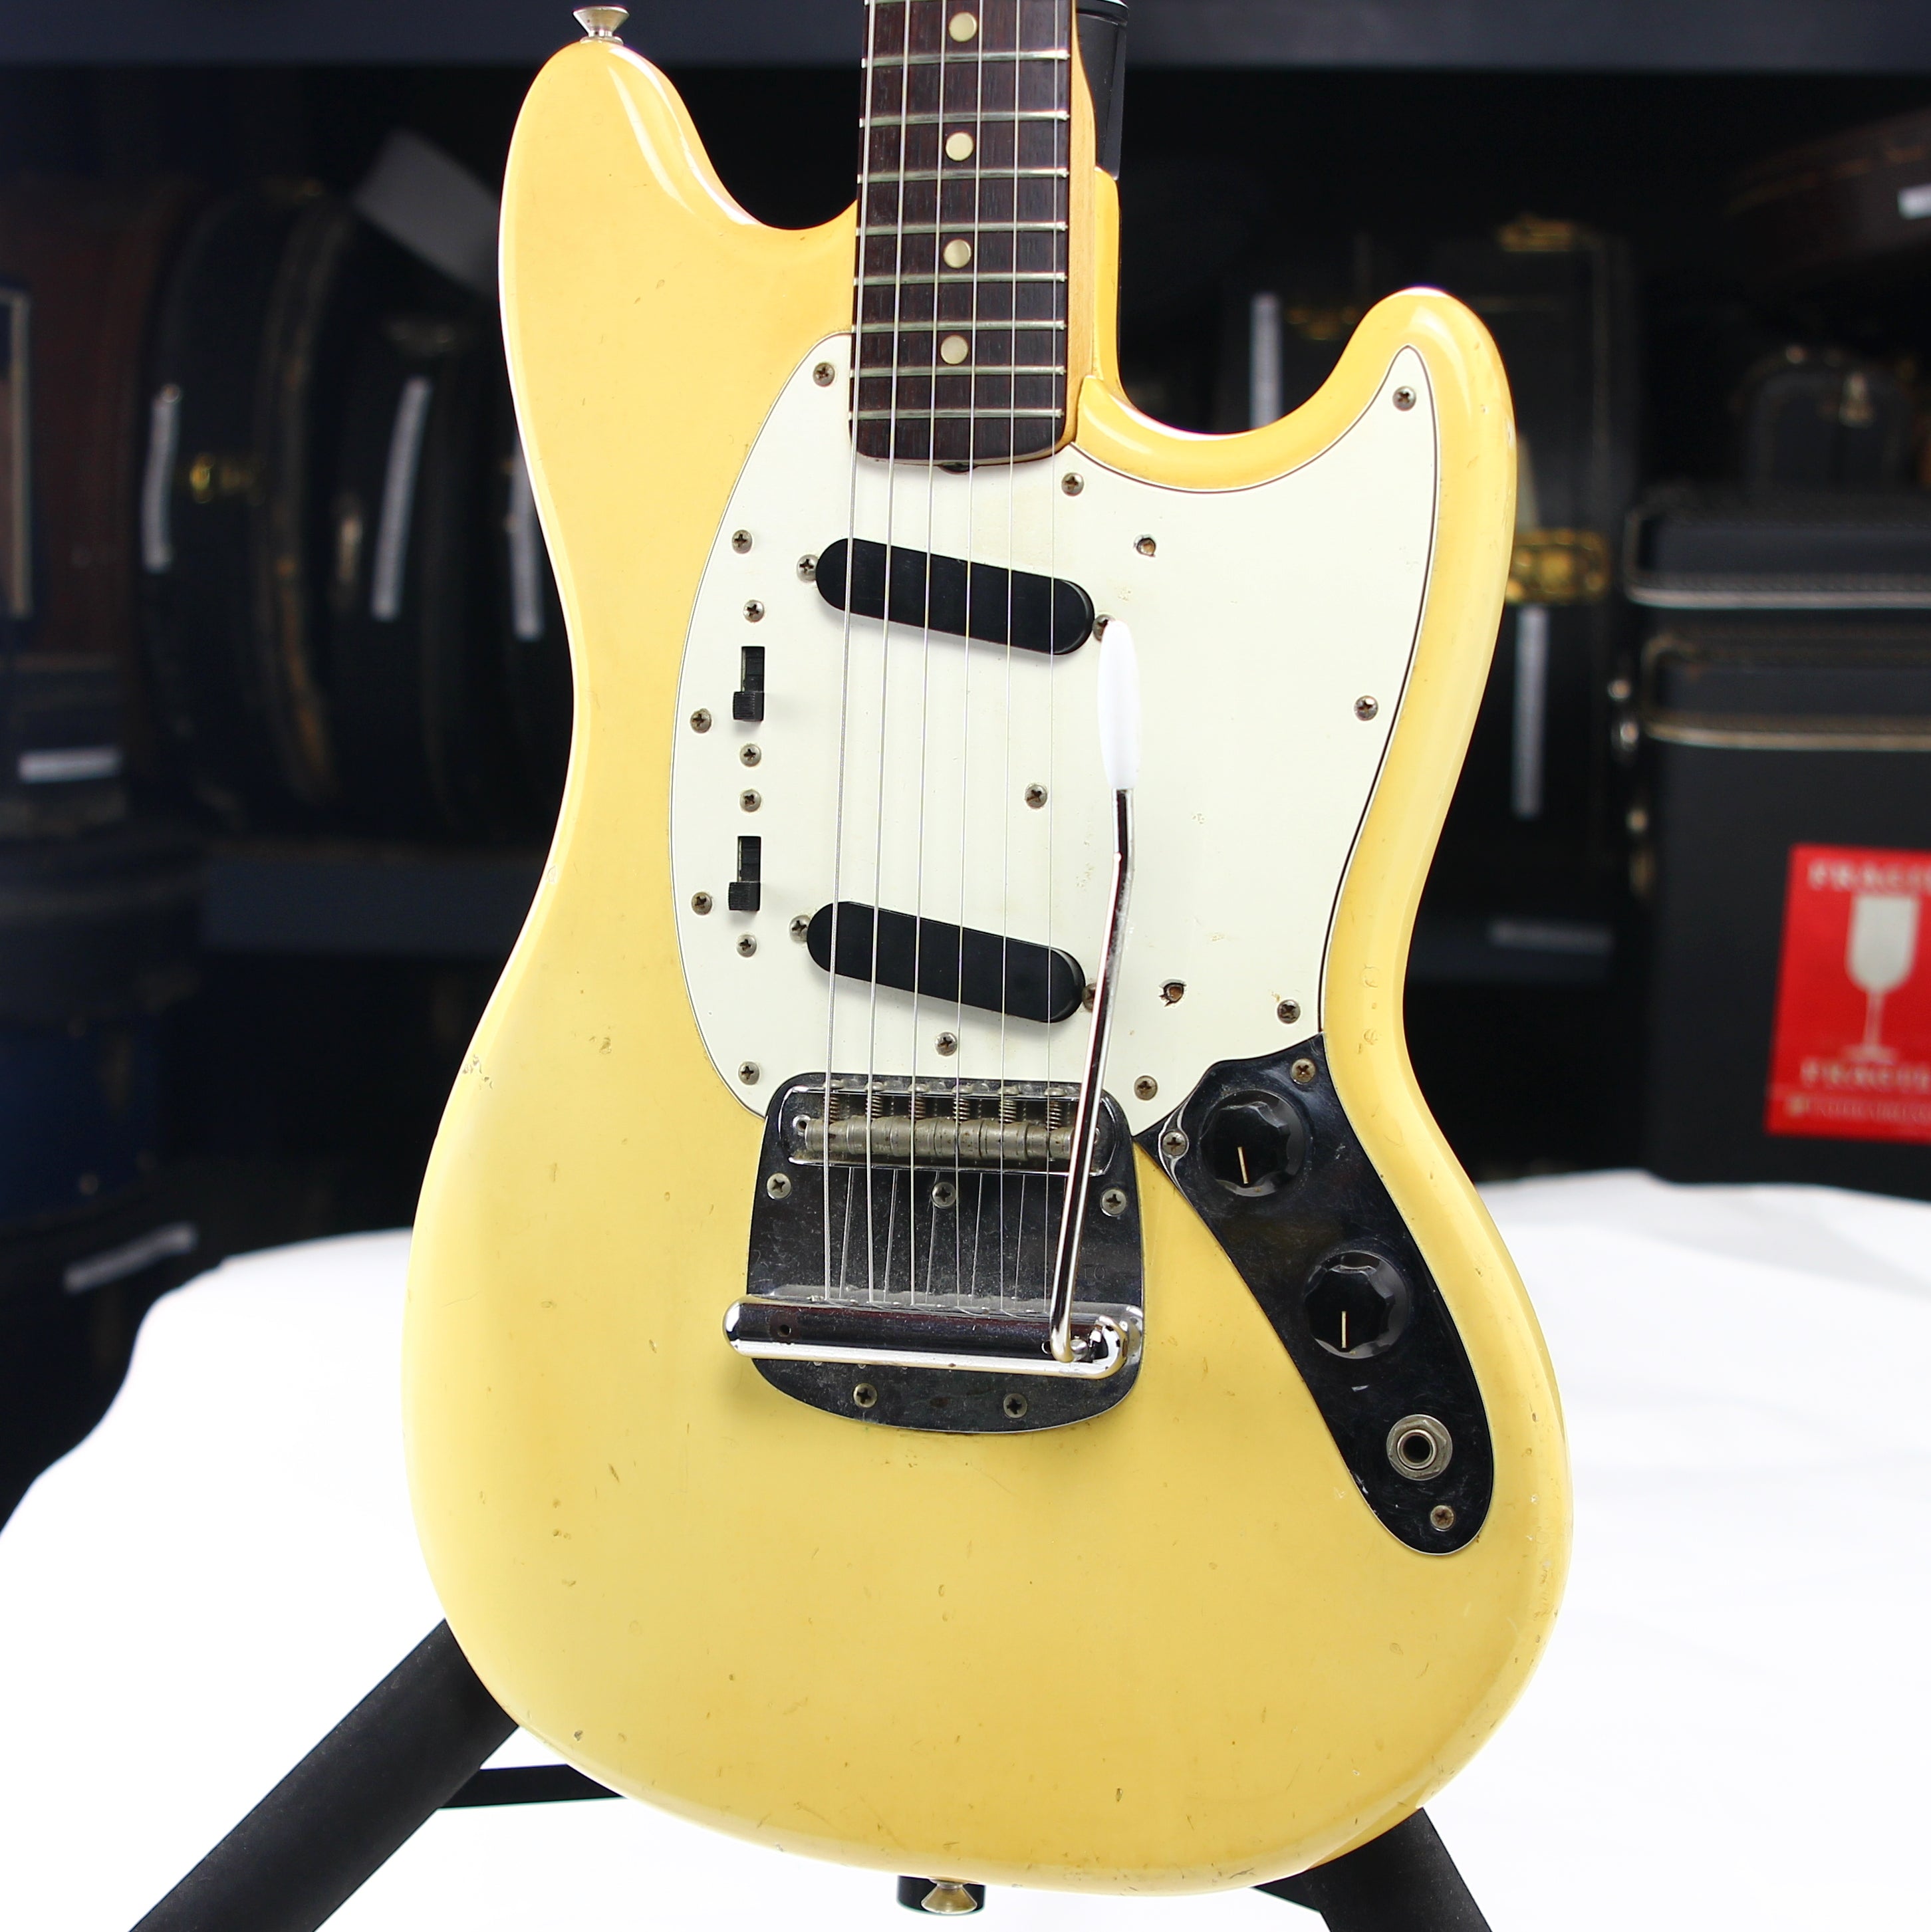 1975 Fender Mustang Olympic White Vintage Electric Guitar - Rosewood Board, 1970's, duo sonic w/ Tremolo!